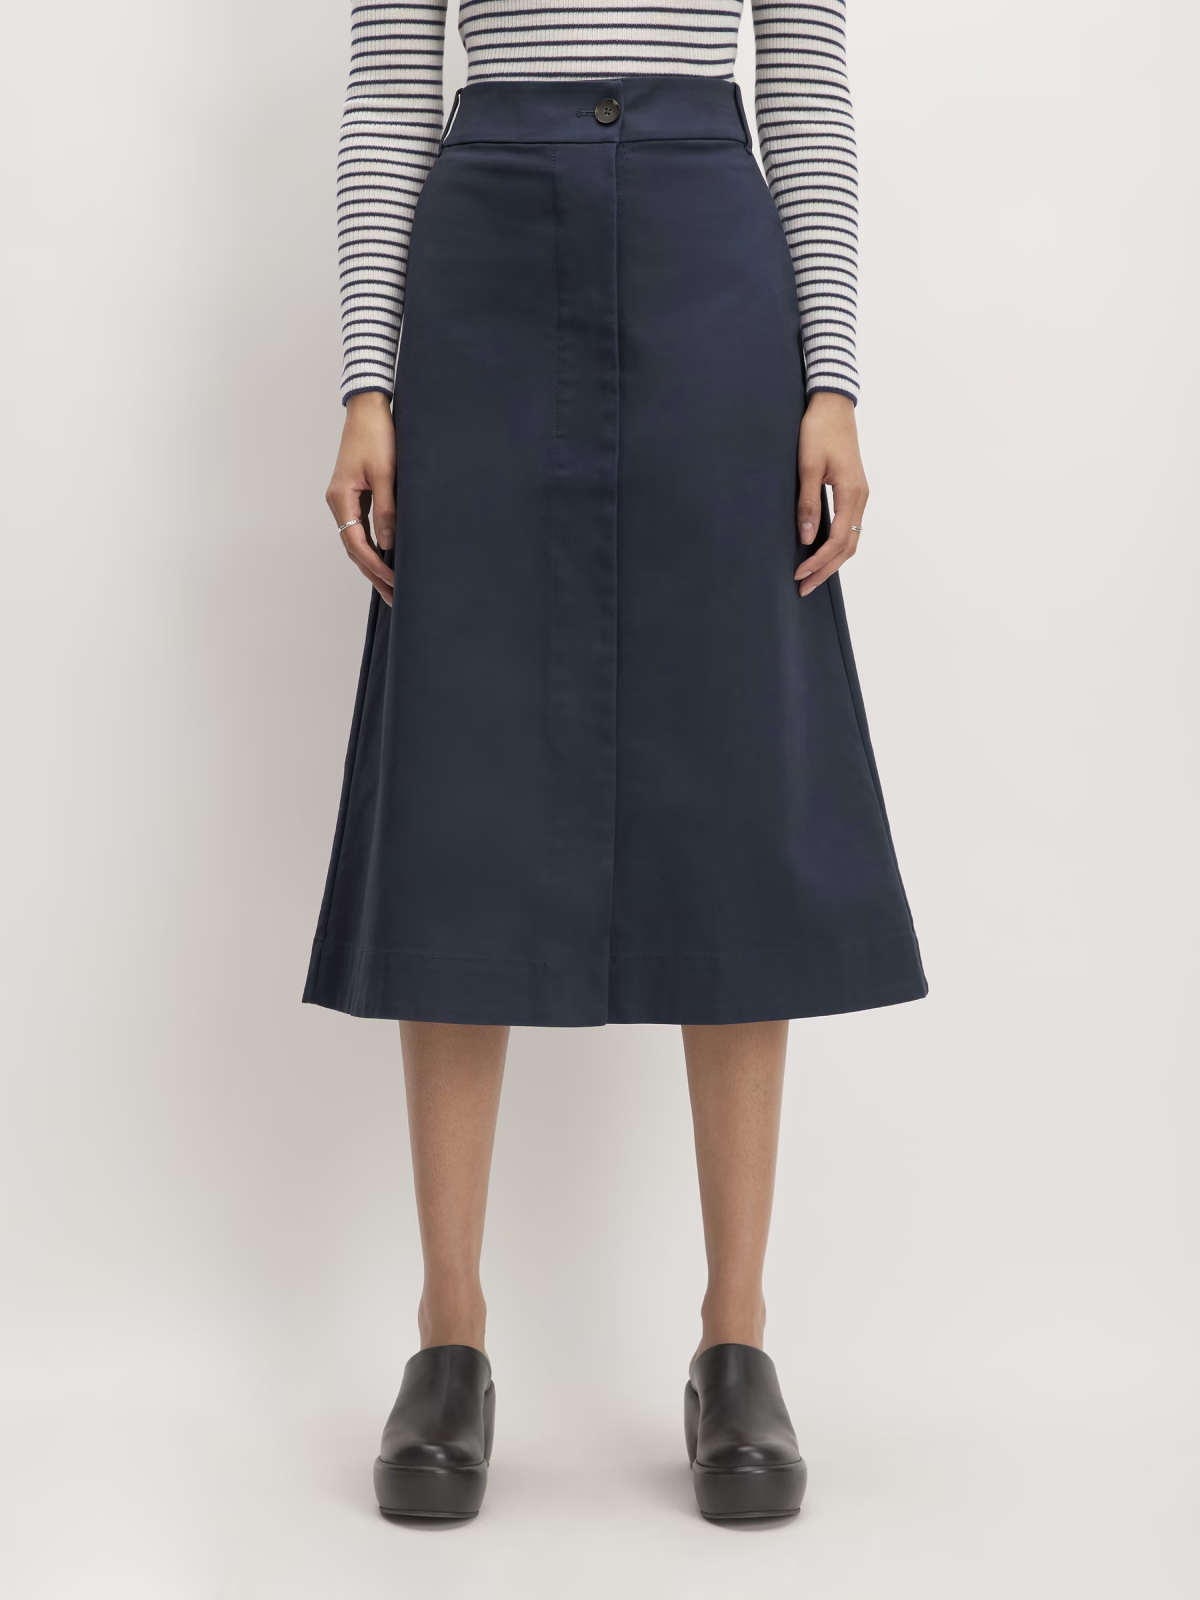 The Structureded A-Line Skirt